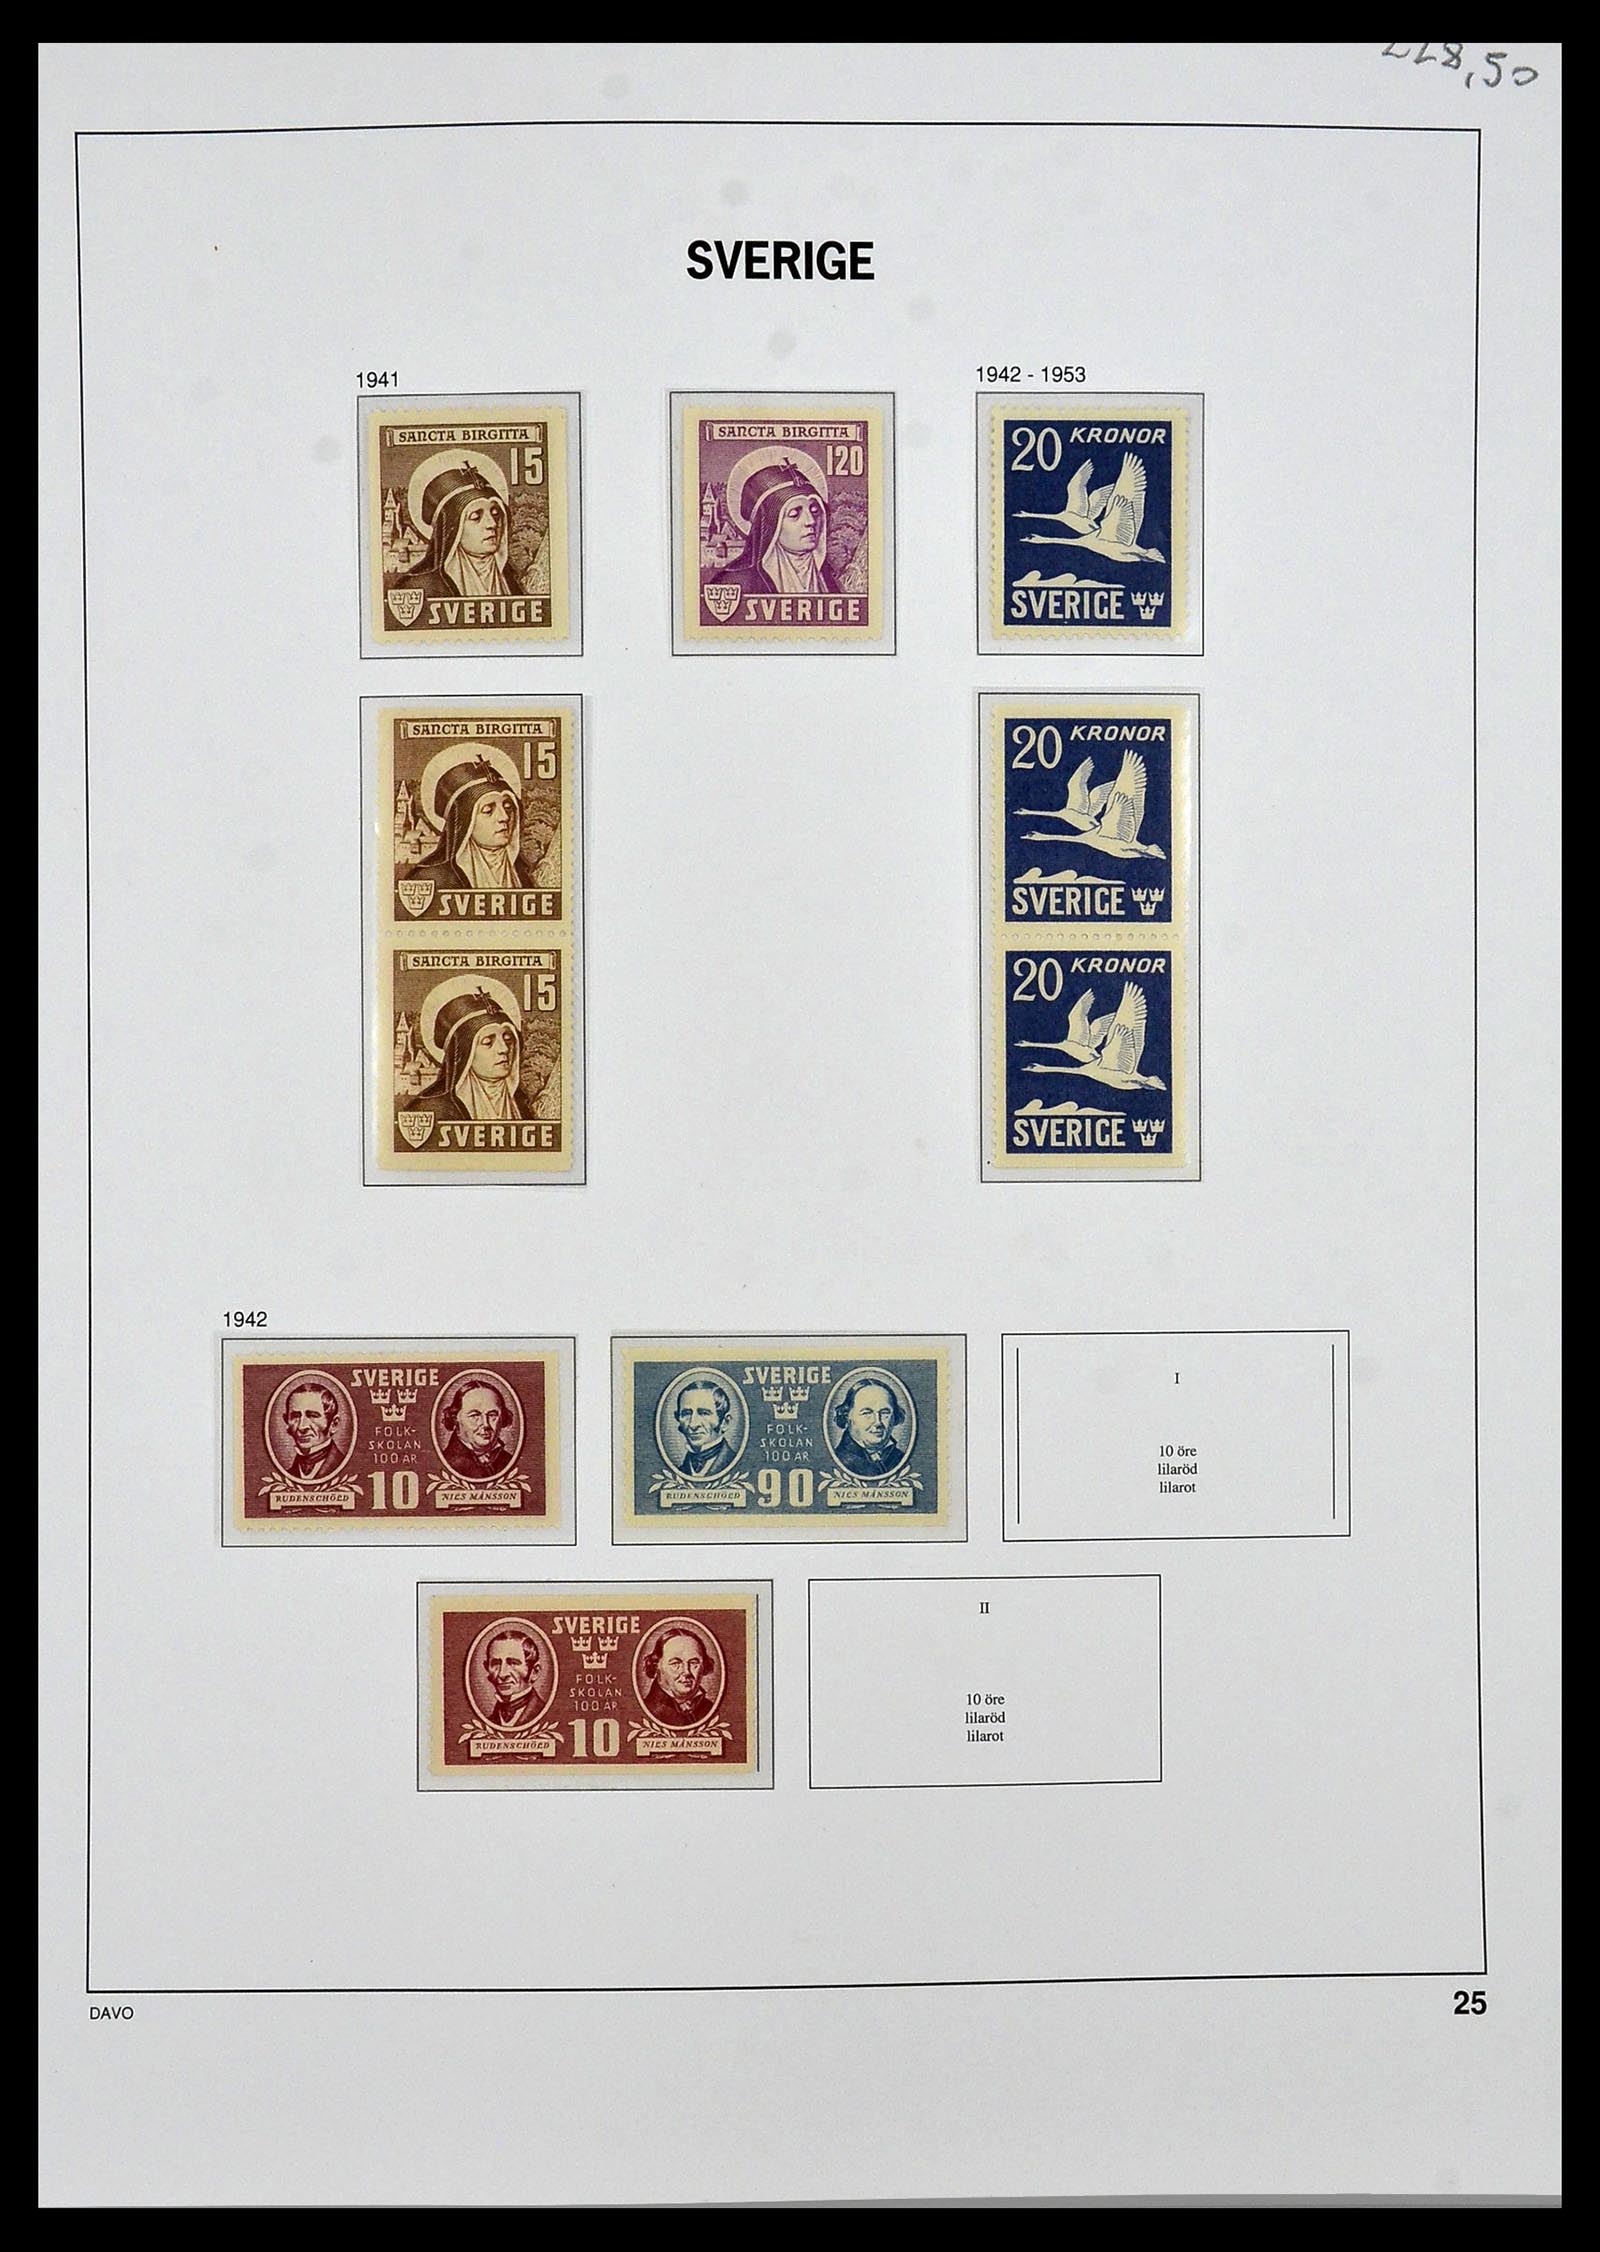 34292 022 - Stamp collection 34292 Sweden 1891-2015!